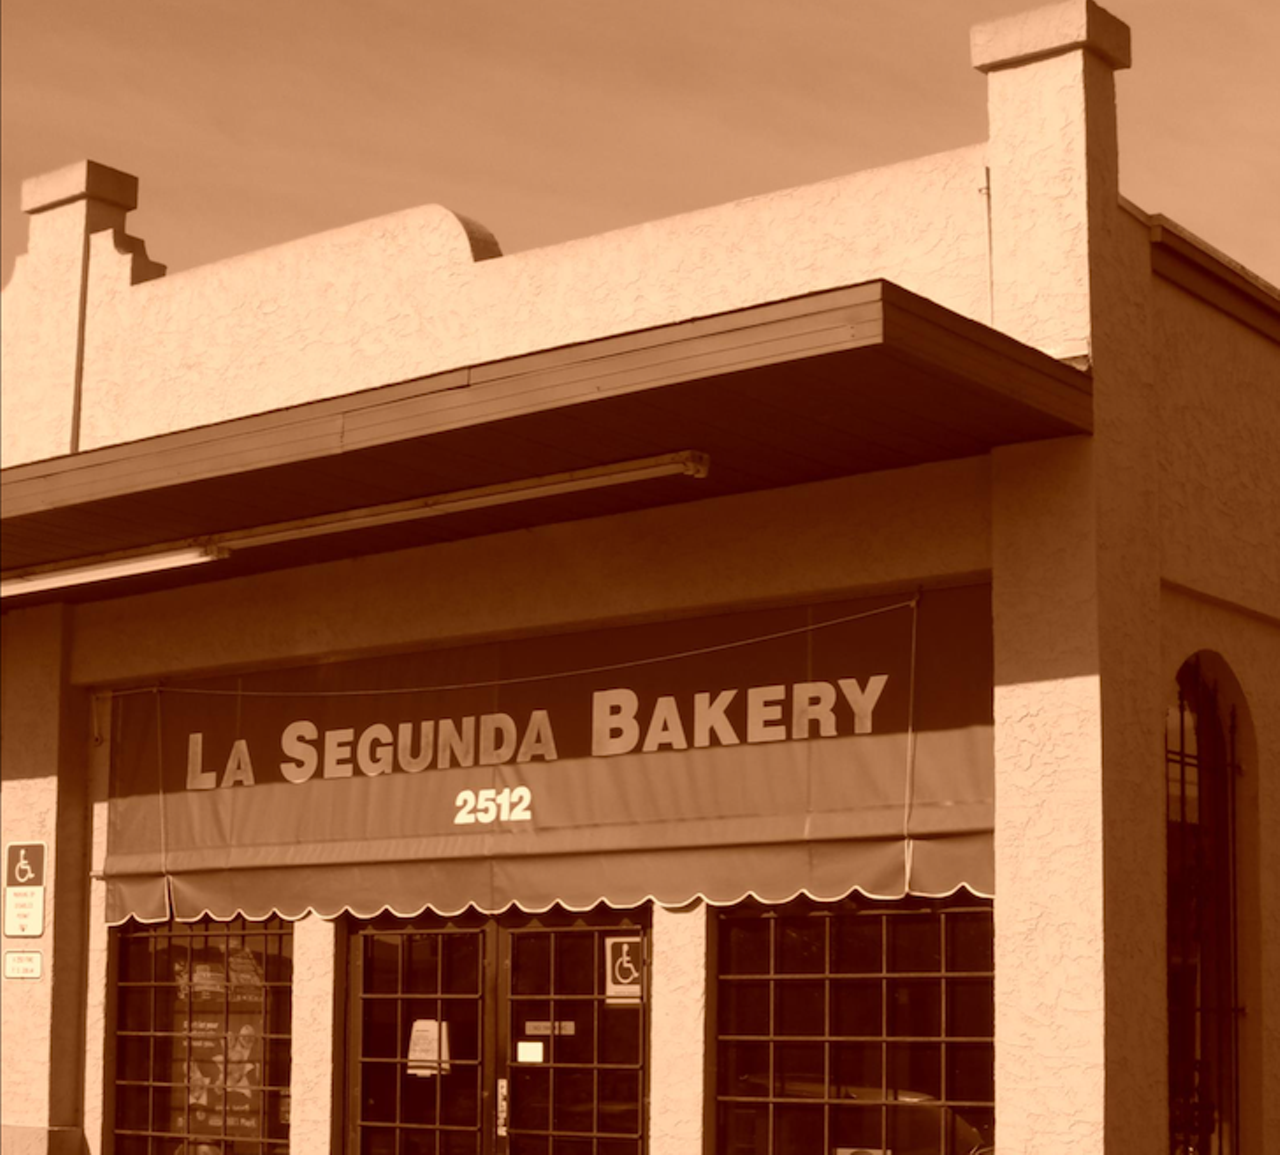 La Segunda
Two locations
The La Segunda Bakery is 106 years and four generations old. It began as one man&#146;s dream from the Catalan region of Spain. In 1915, he brought a traditional Cuban recipe to the Cuban epicenter Ybor City. Today, the bakery&#151;it's flagship is at 2512 N 15th St. in Ybor City&#151;produces 18,000 loaves of Cuban bread every day and ships it to markets and restaurants around the country. The bakery also has a lot of sweets.
Photo via La Segunda/Facebook